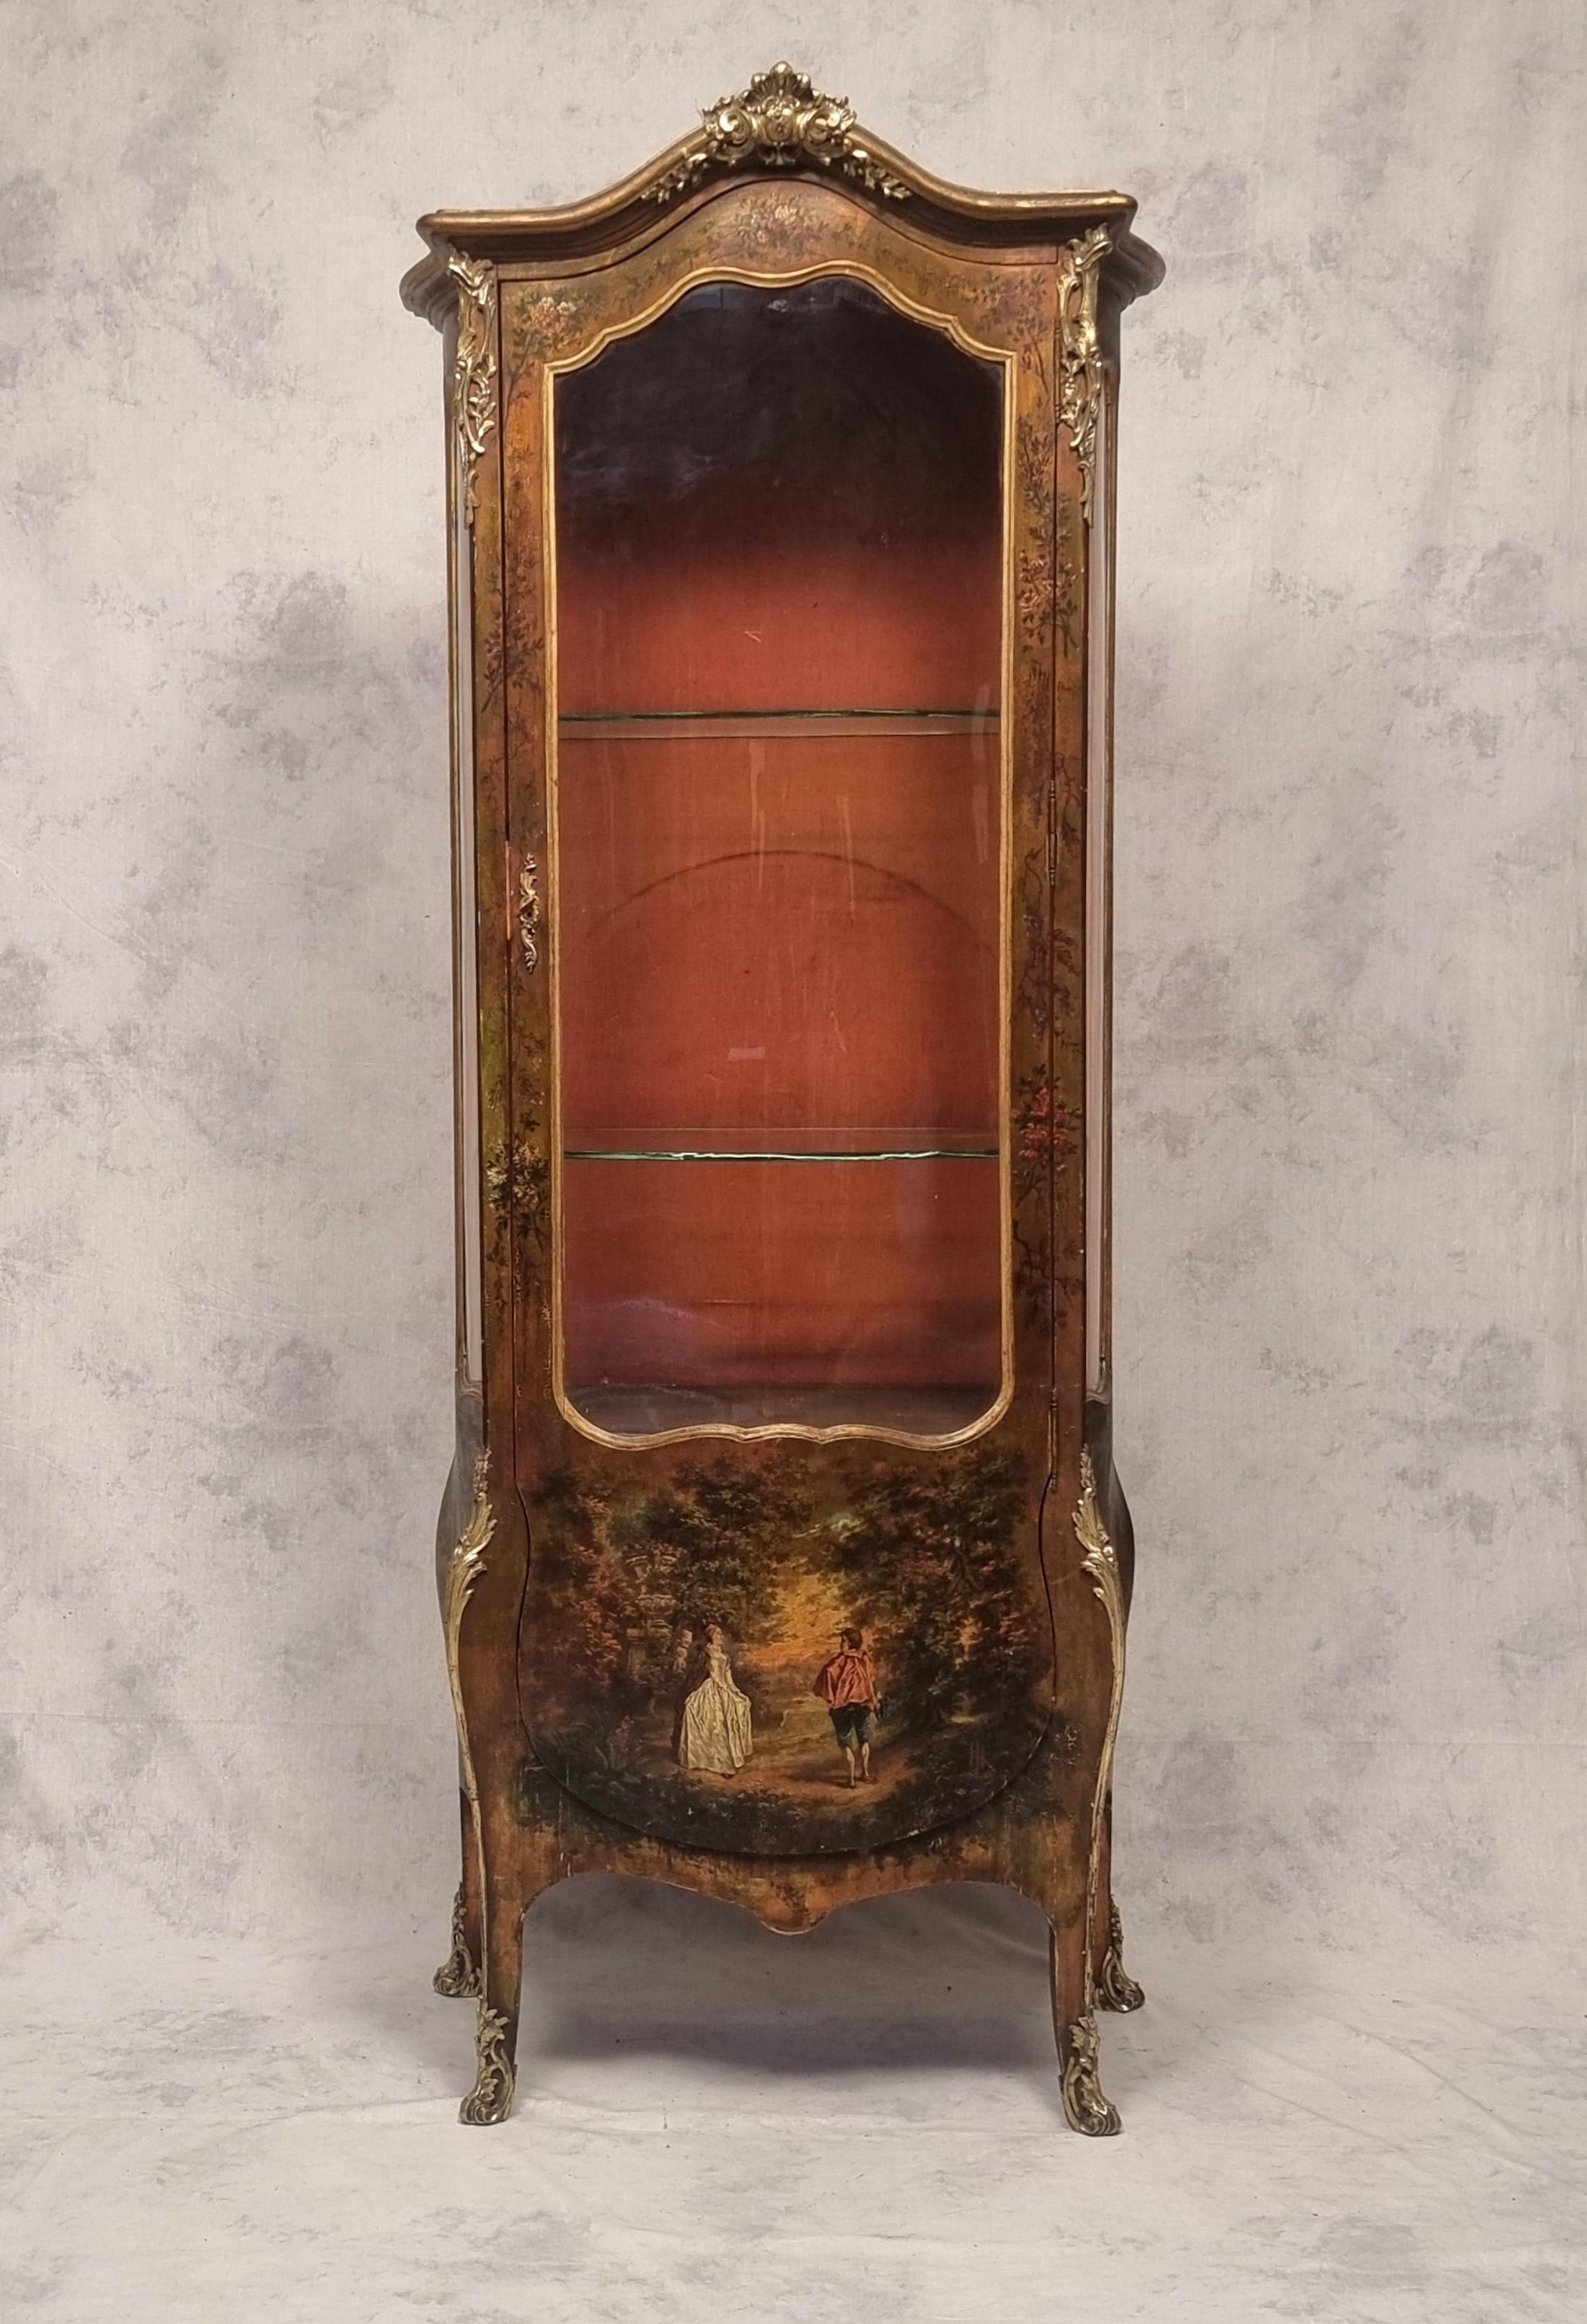 Late 19th century Louis XV style domed showcase in painted wood. It presents a magnificent gallant decor of a man and a woman meeting in an undergrowth. Floral ornaments are visible on the entire showcase, which is entirely covered with fine quality